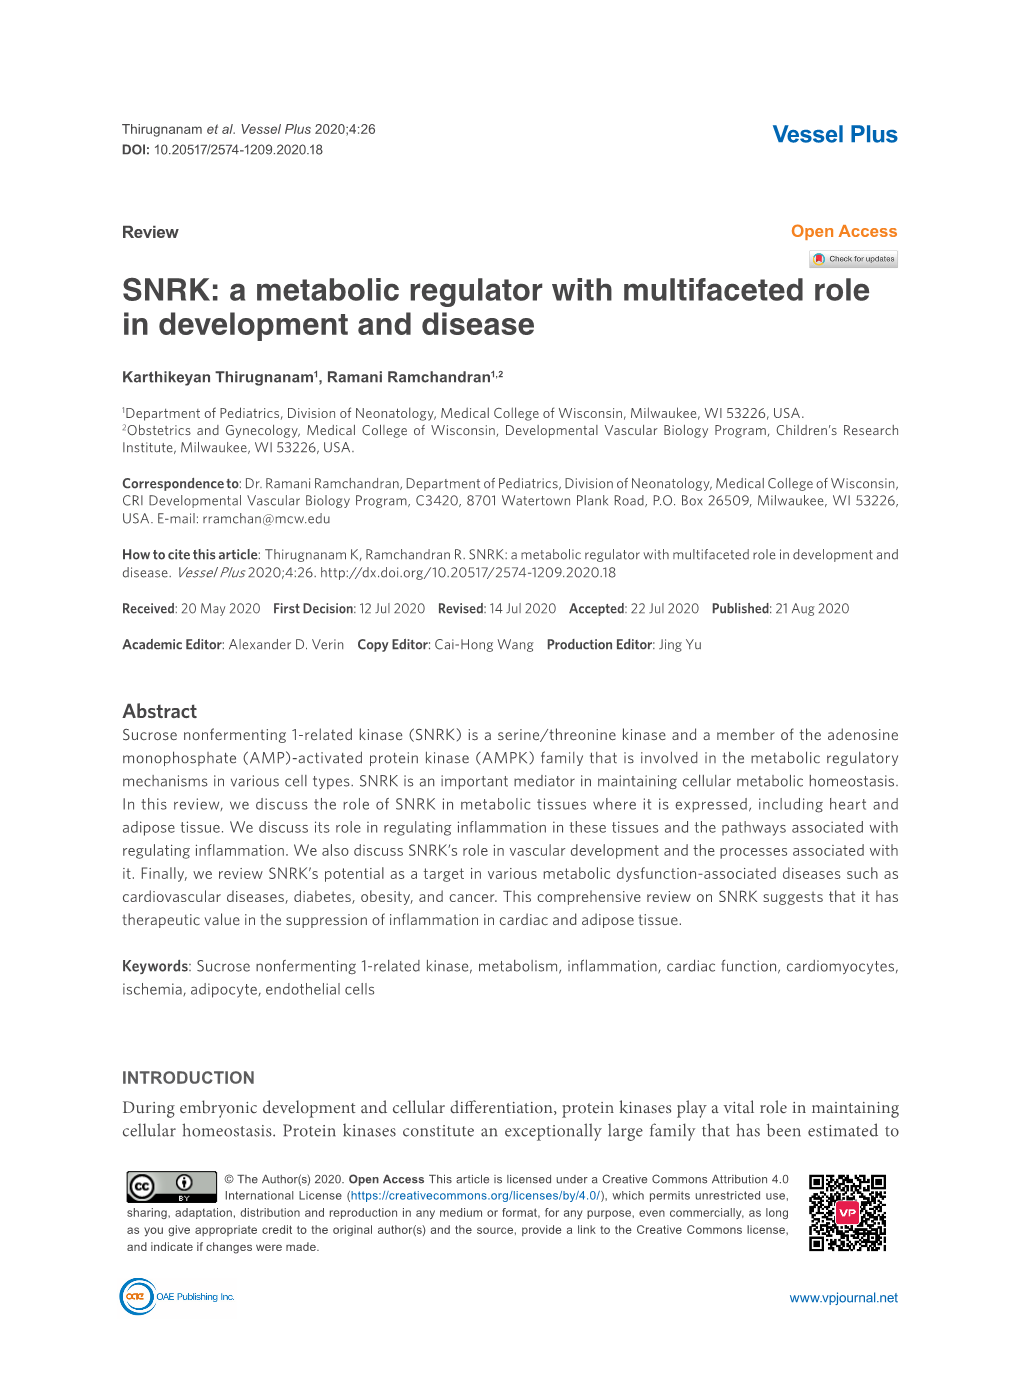 SNRK: a Metabolic Regulator with Multifaceted Role in Development and Disease